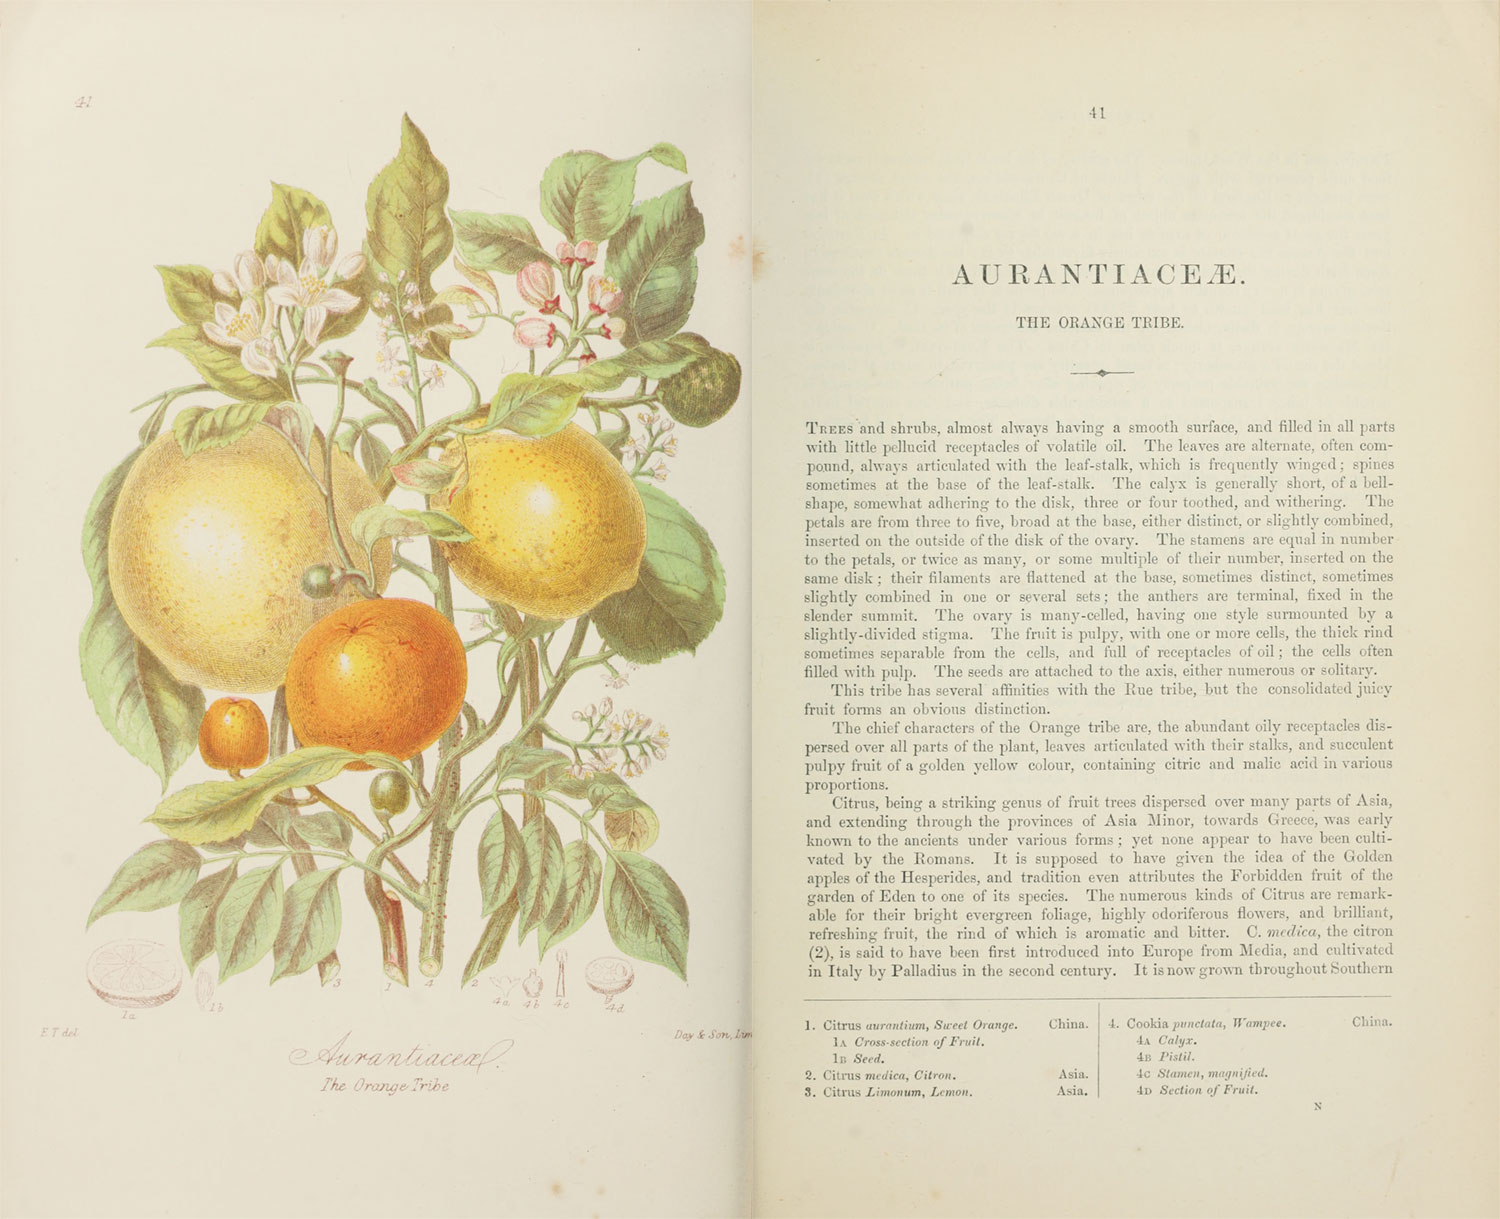 Page spread of scans of the original illustration (left) and first page of description (right) of the orange tribe